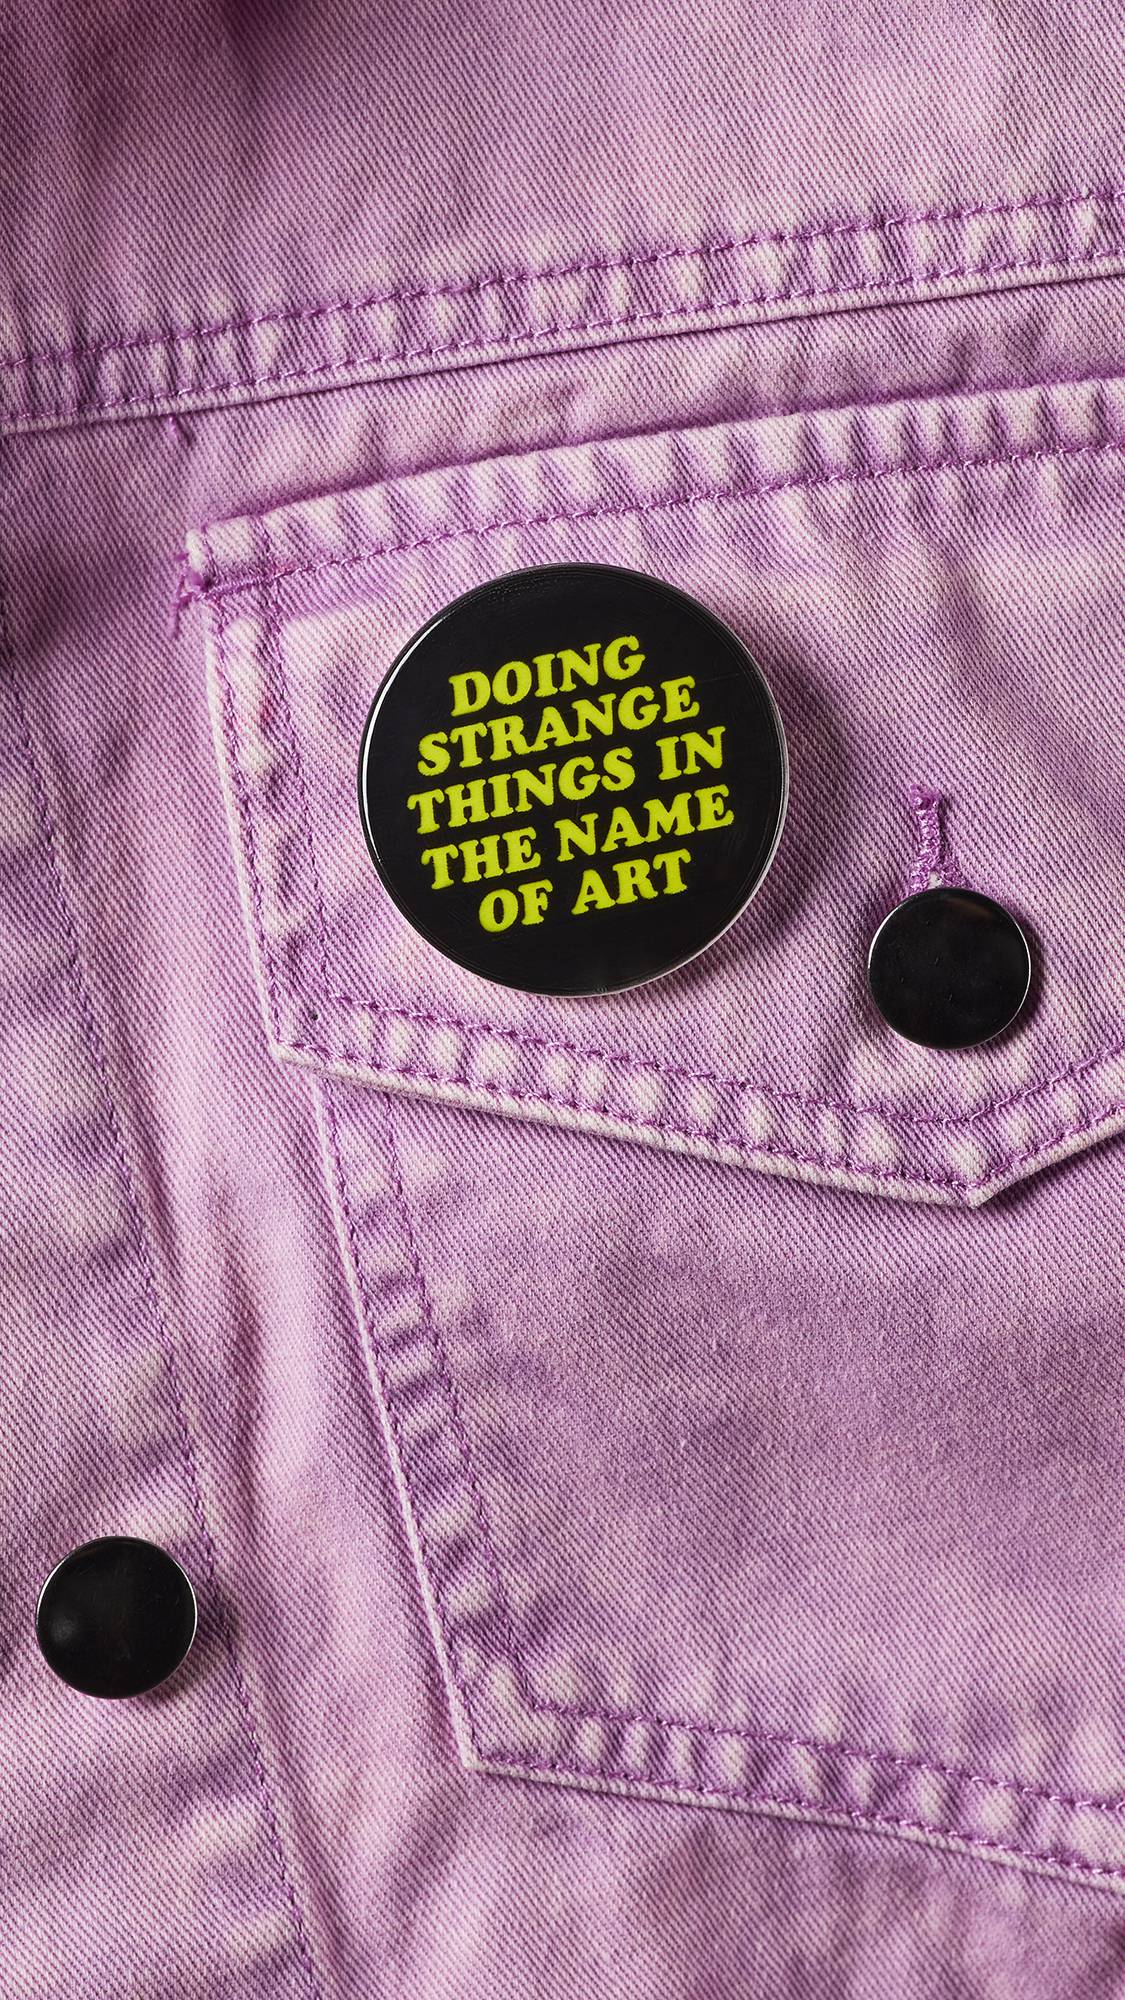 A close-up of the black badge with the green text "Doing Strange Things In The Name Of Art" pinned to a baby pink denim jacket pocket. 